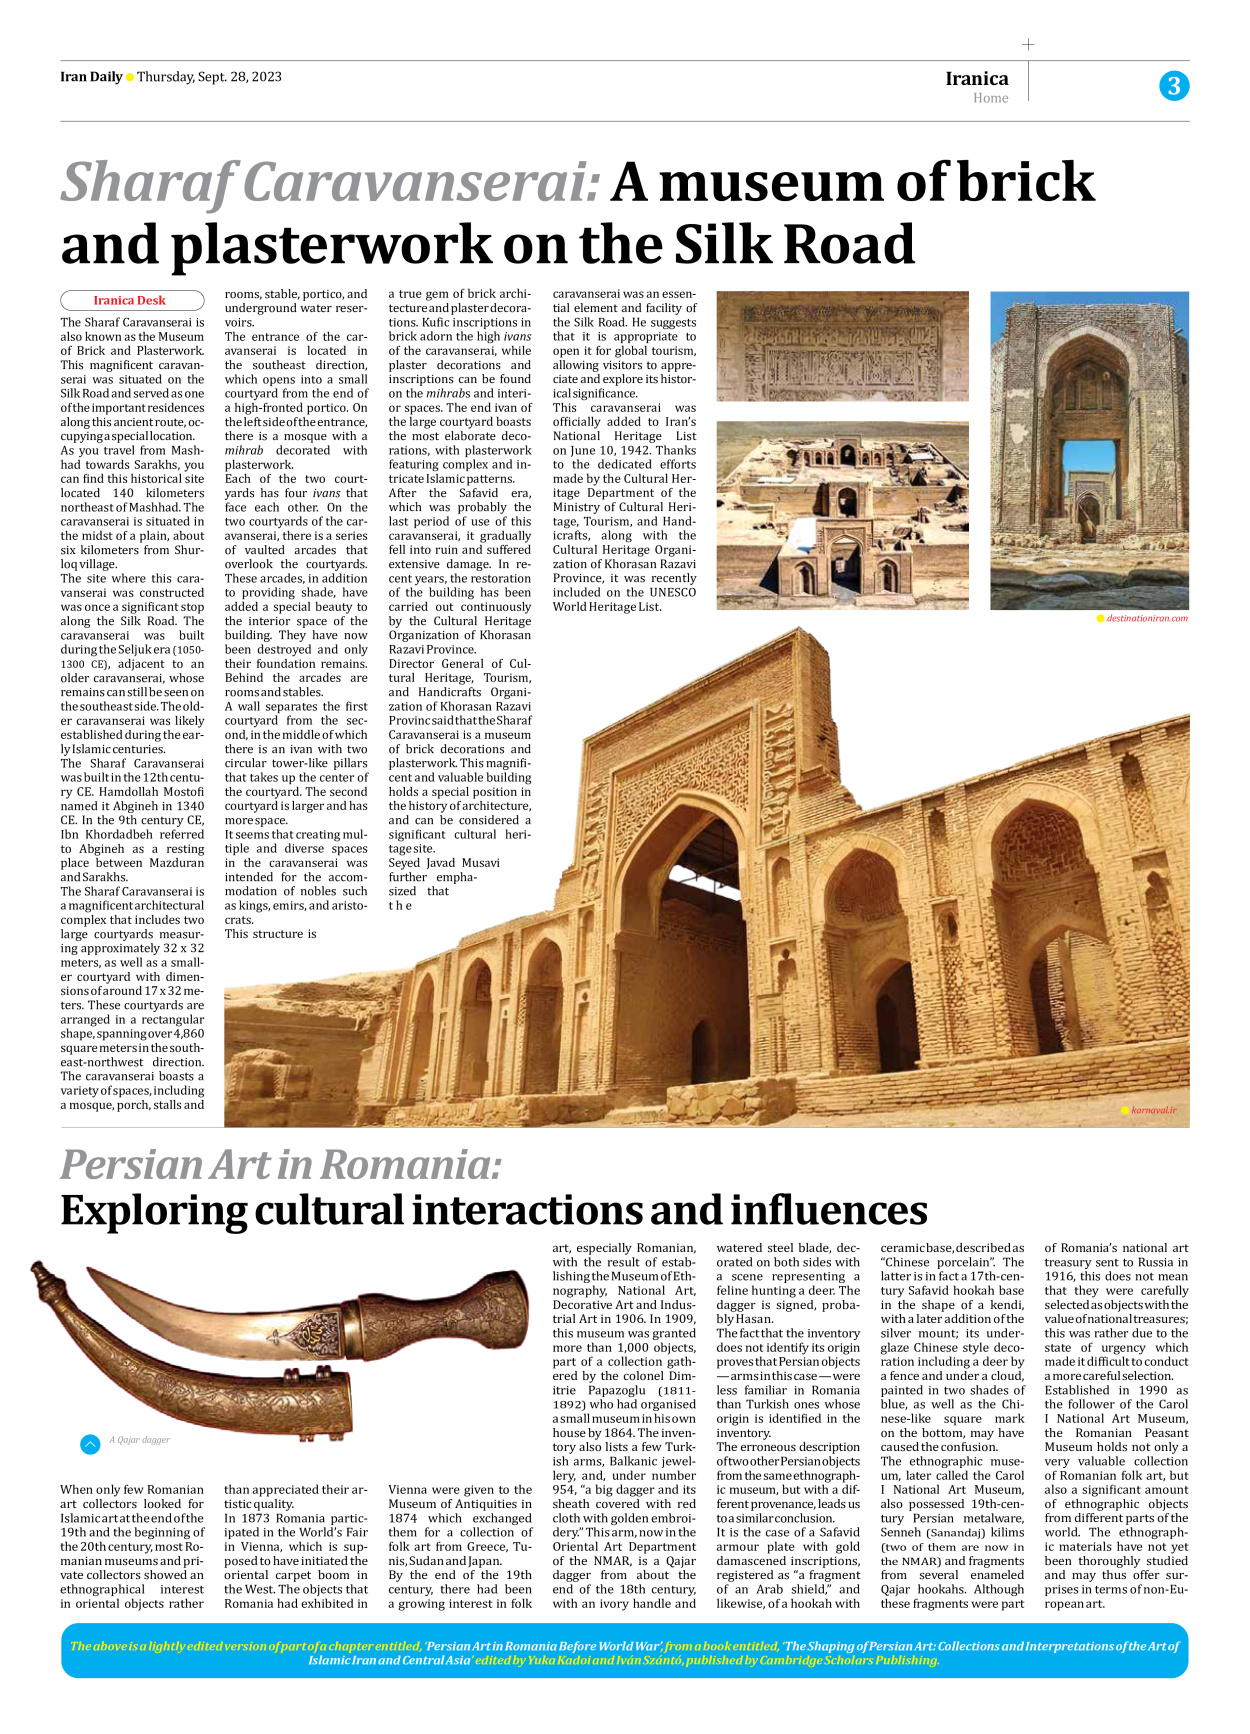 Iran Daily - Number Seven Thousand Three Hundred and Ninety Five - 28 September 2023 - Page 3